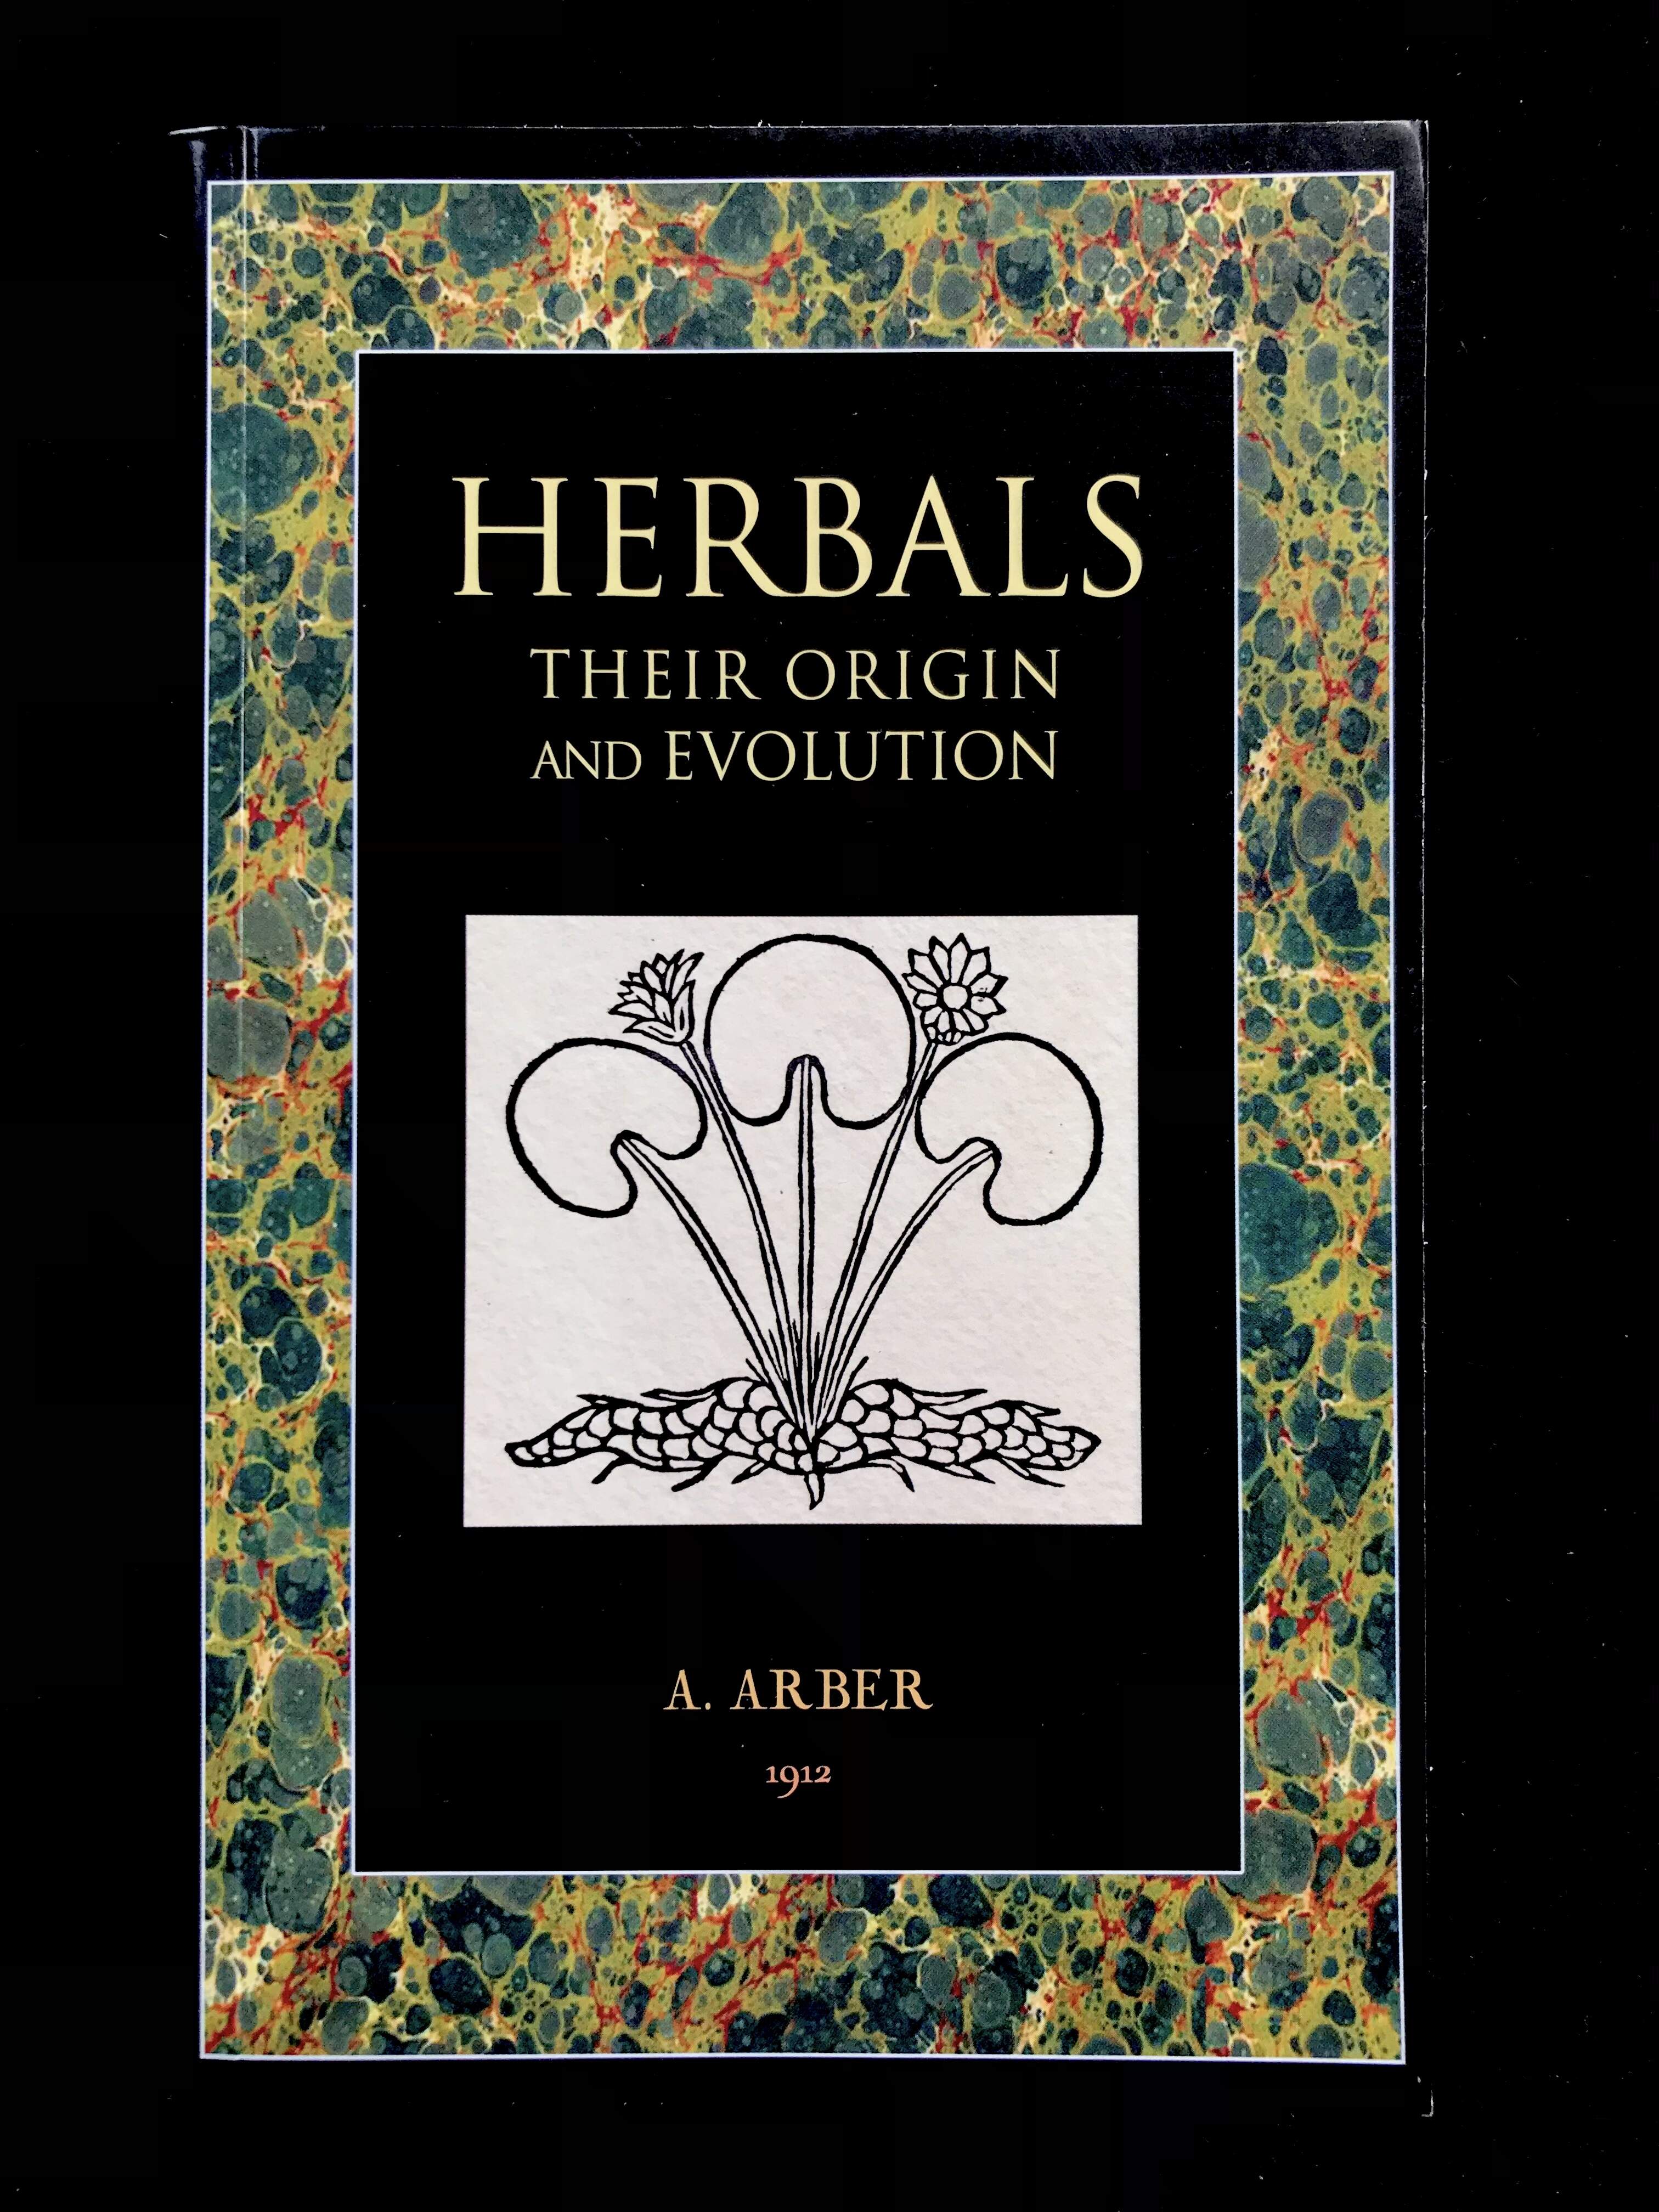 Herbals Their Origin And Evolution by A. Arber